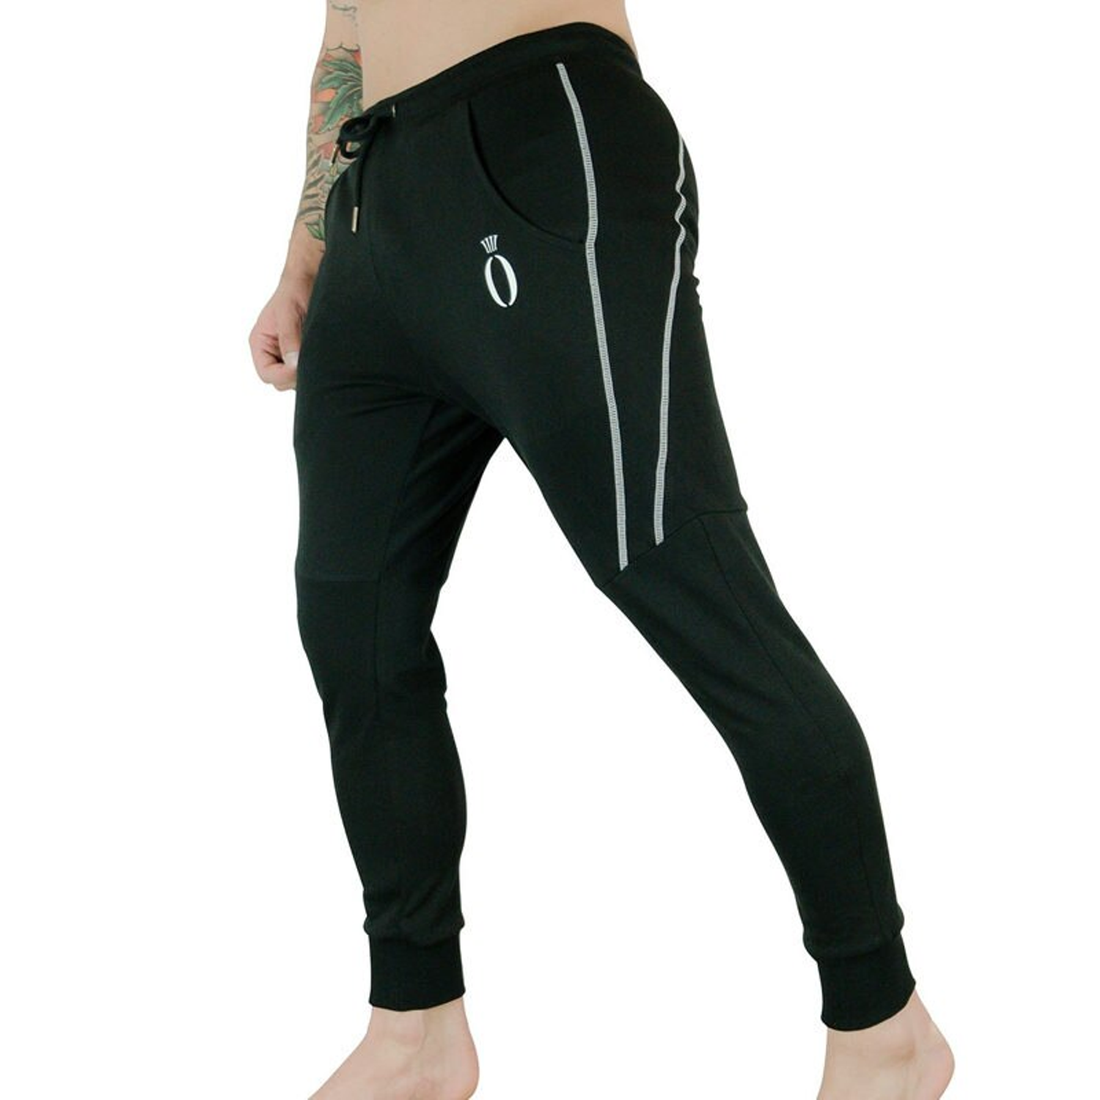 Men's Fitness Tracksuit | Hooded Sweatshirt And Pants